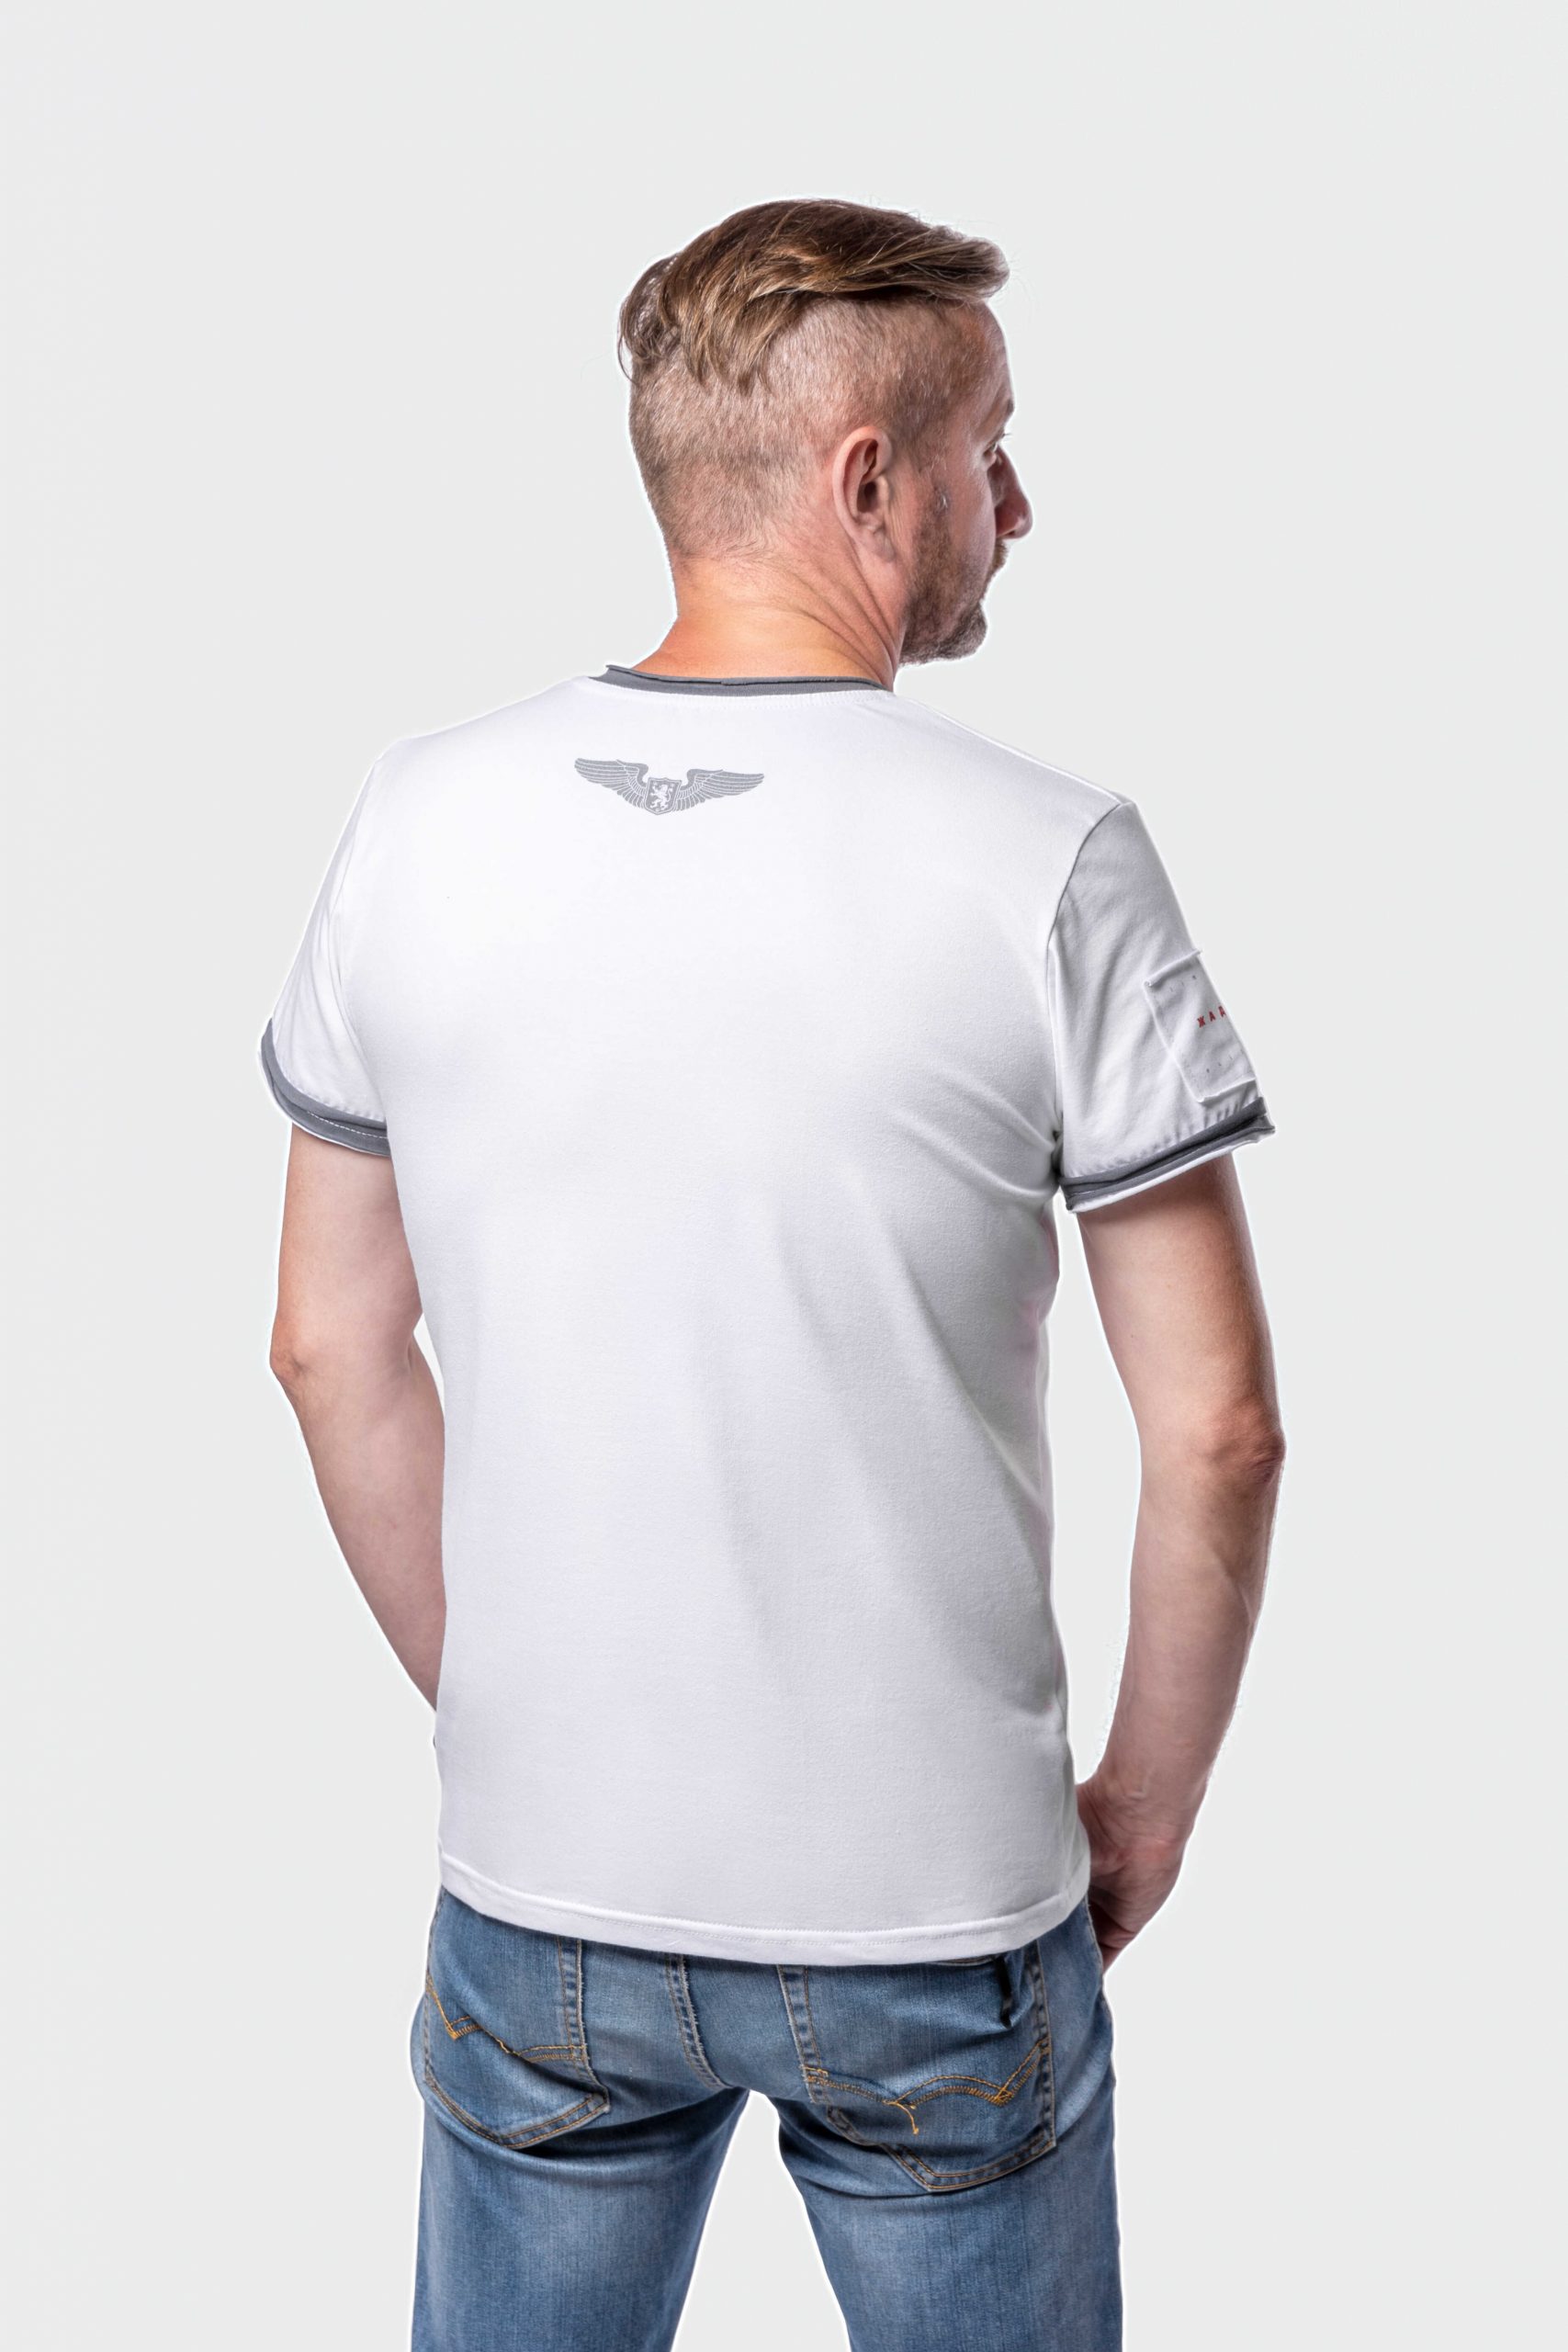 Men's T-Shirt Culture And Weapon. Color white. 1.